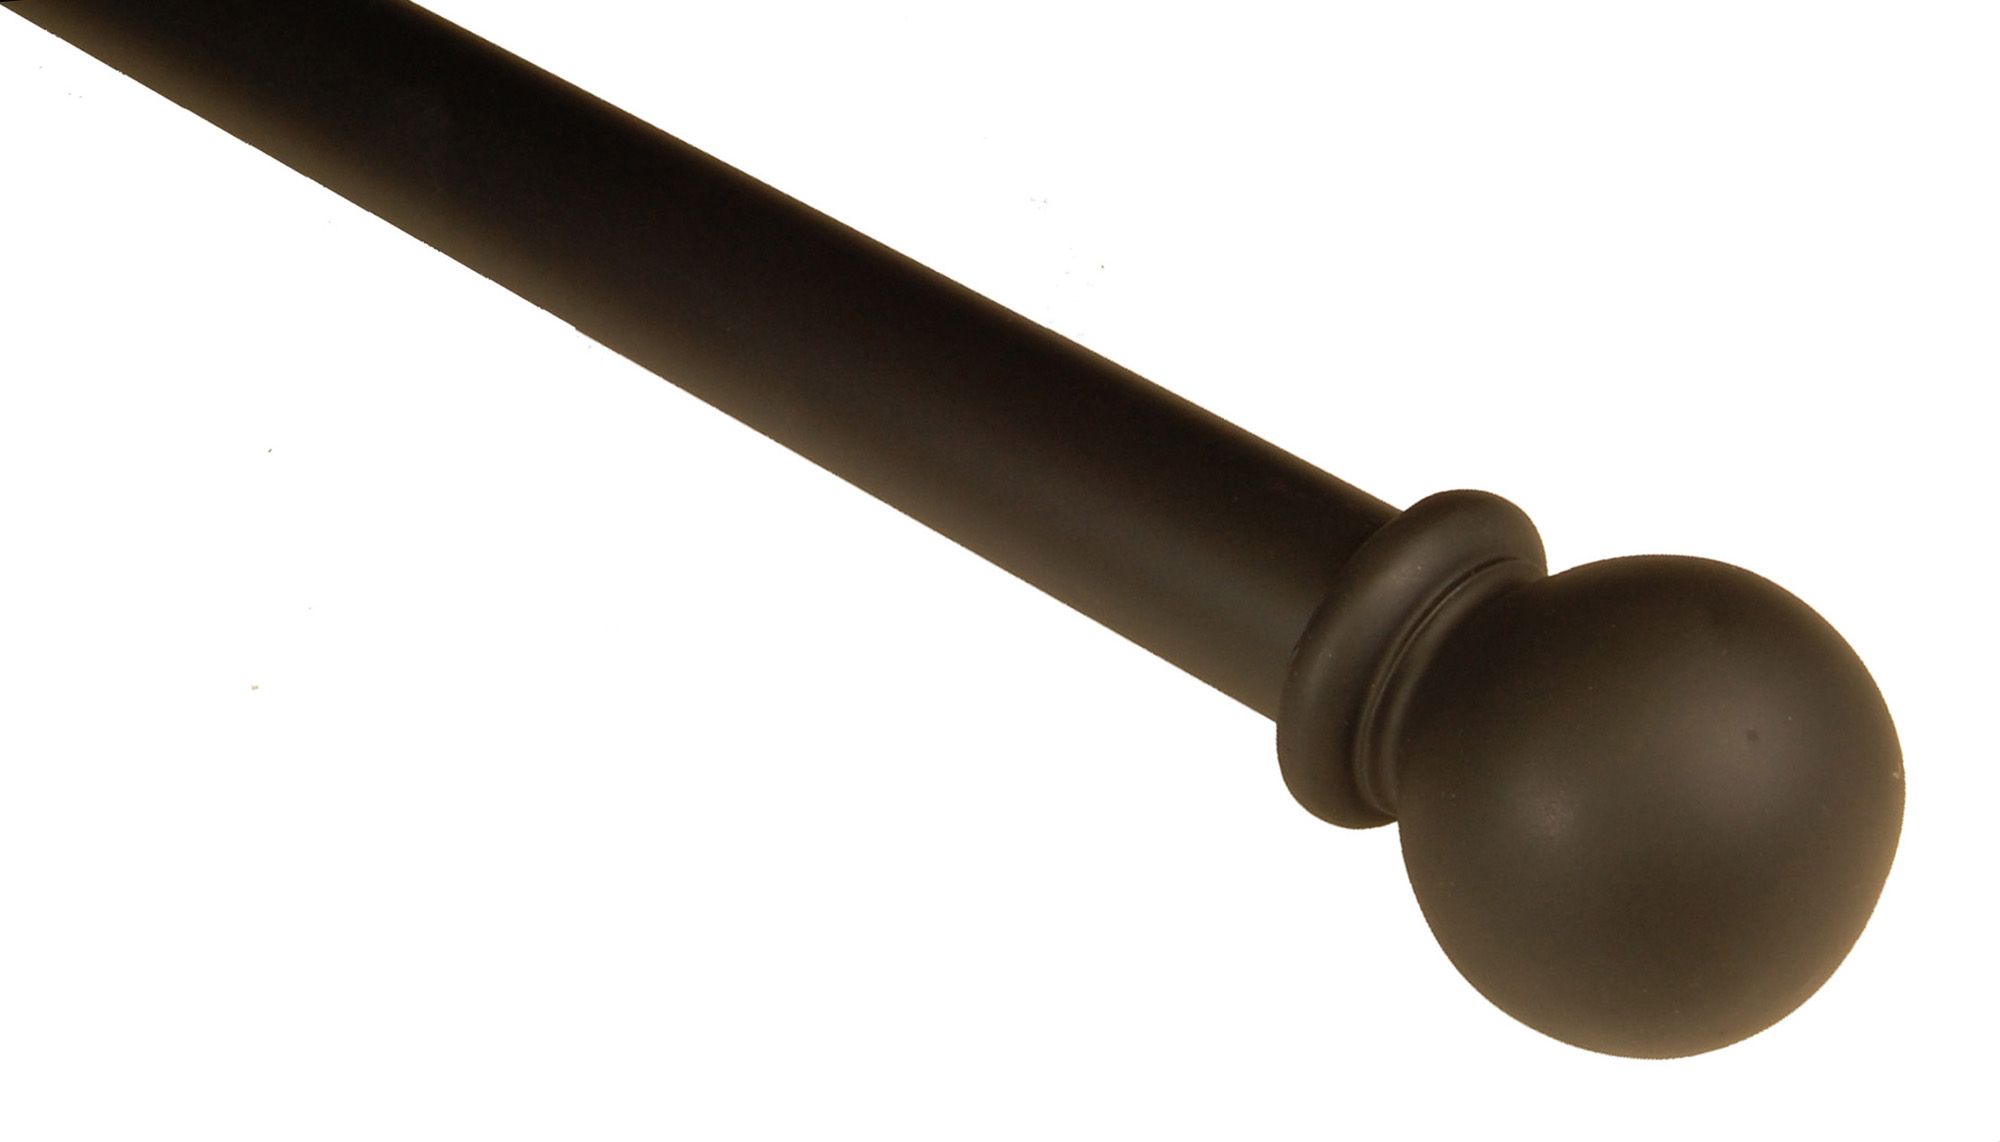 BCL Classic Ball Curtain Rod, Black Finish, 86-inch to 120-inch, 1.25-inch Diameter Pole